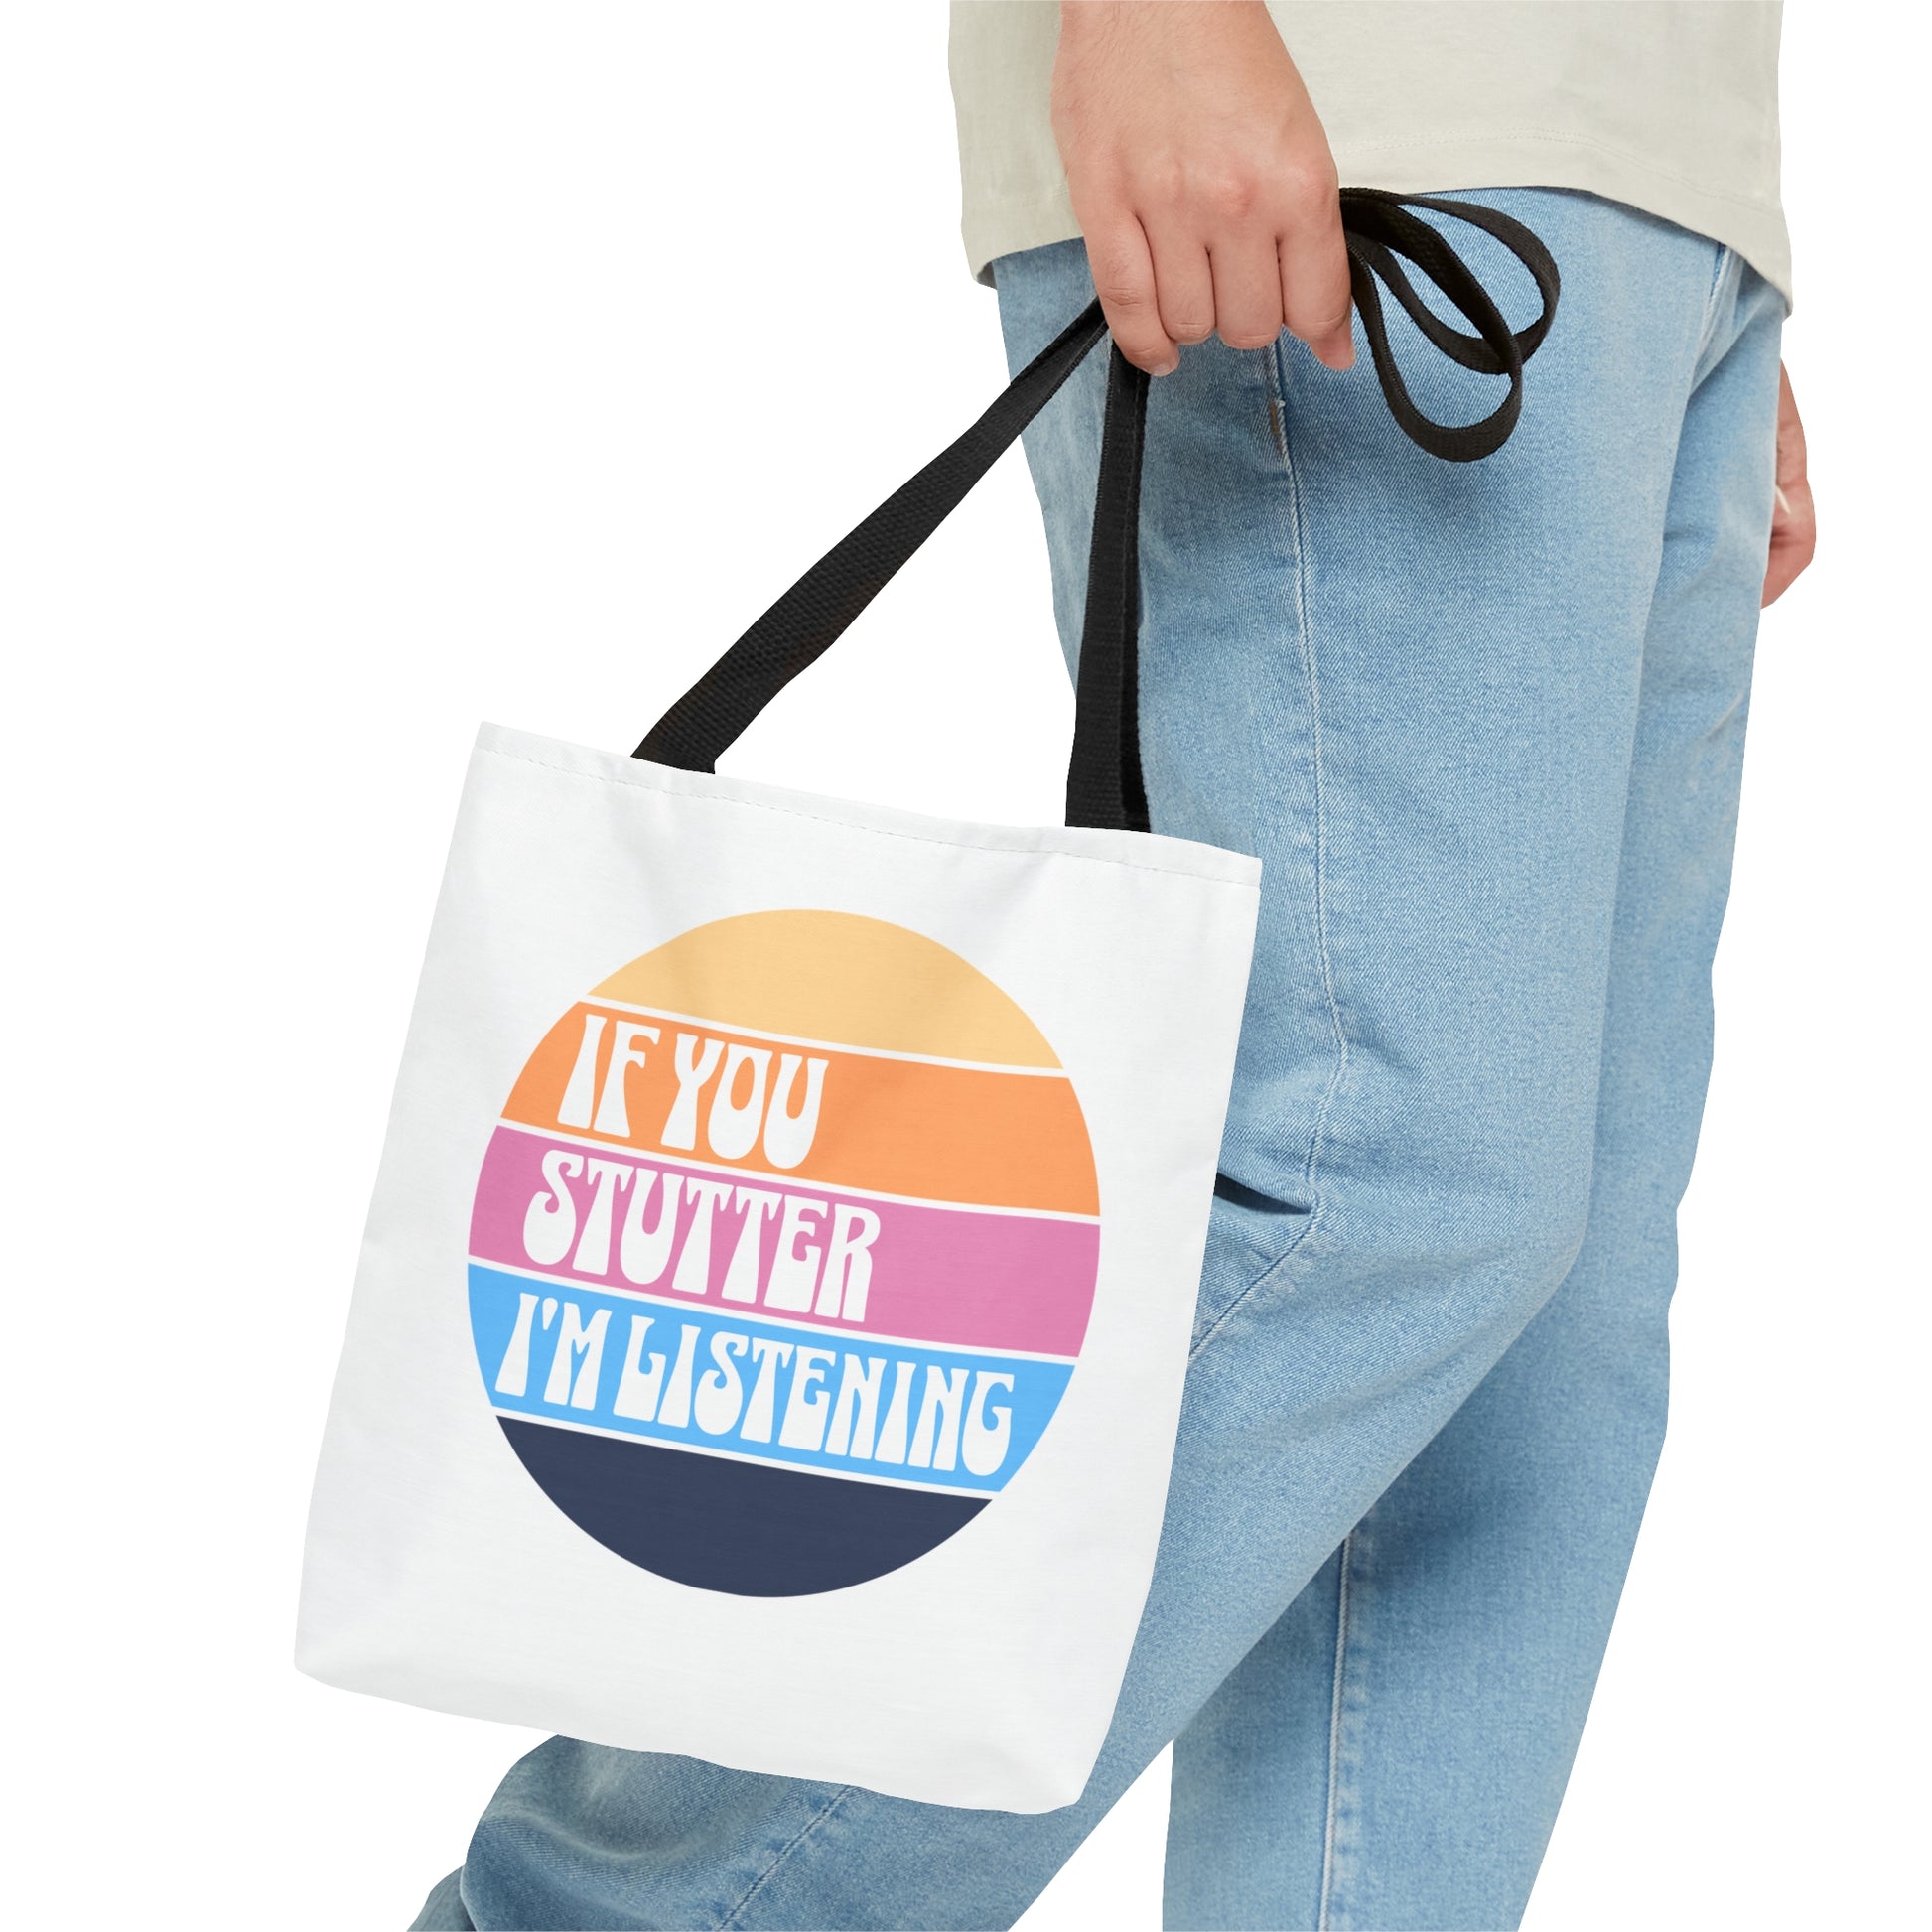 Stuttering Ally If you Stutter, I'm Listening Tote Bag - Normalize Stuttering Challenge